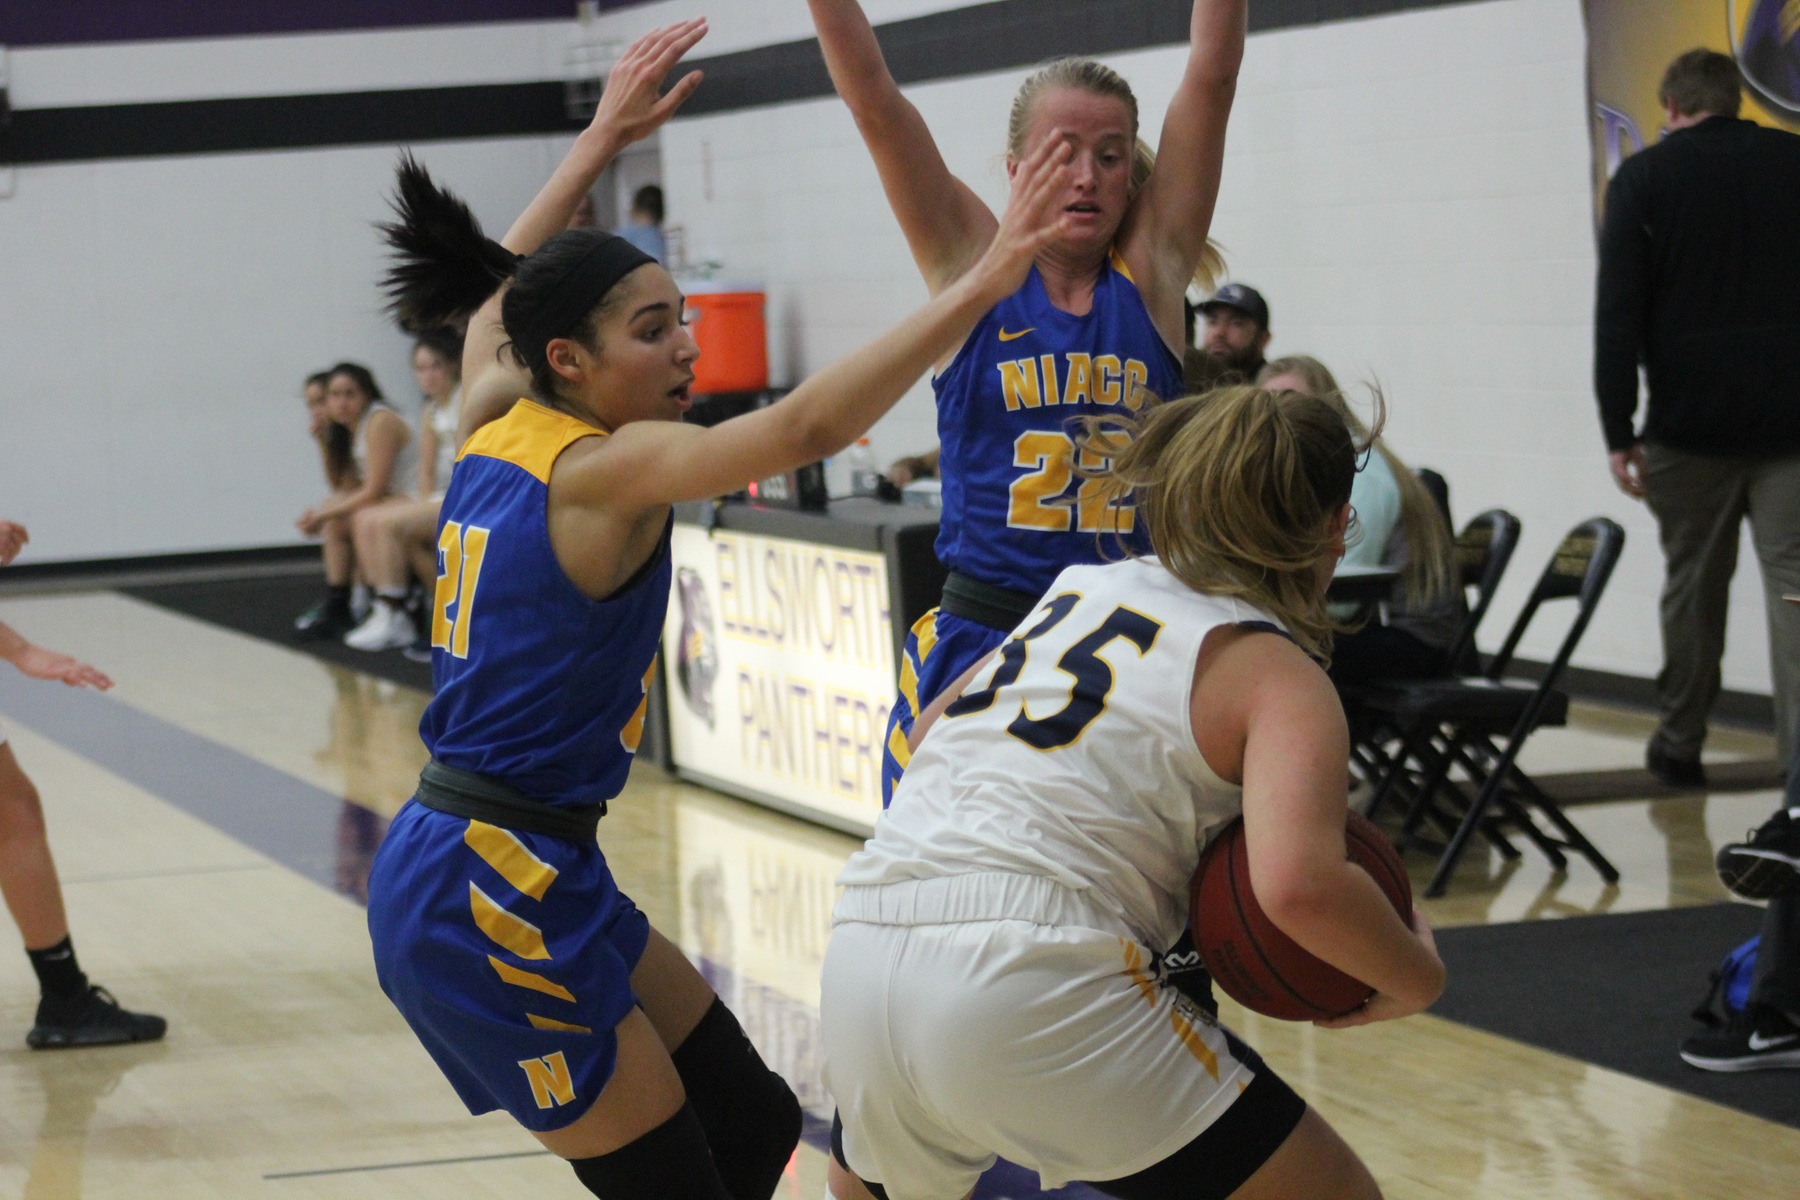 NIACC's Jada Buford (left) and Alexa Loftus defend in second half of Friday's game against Marshalltown CC.